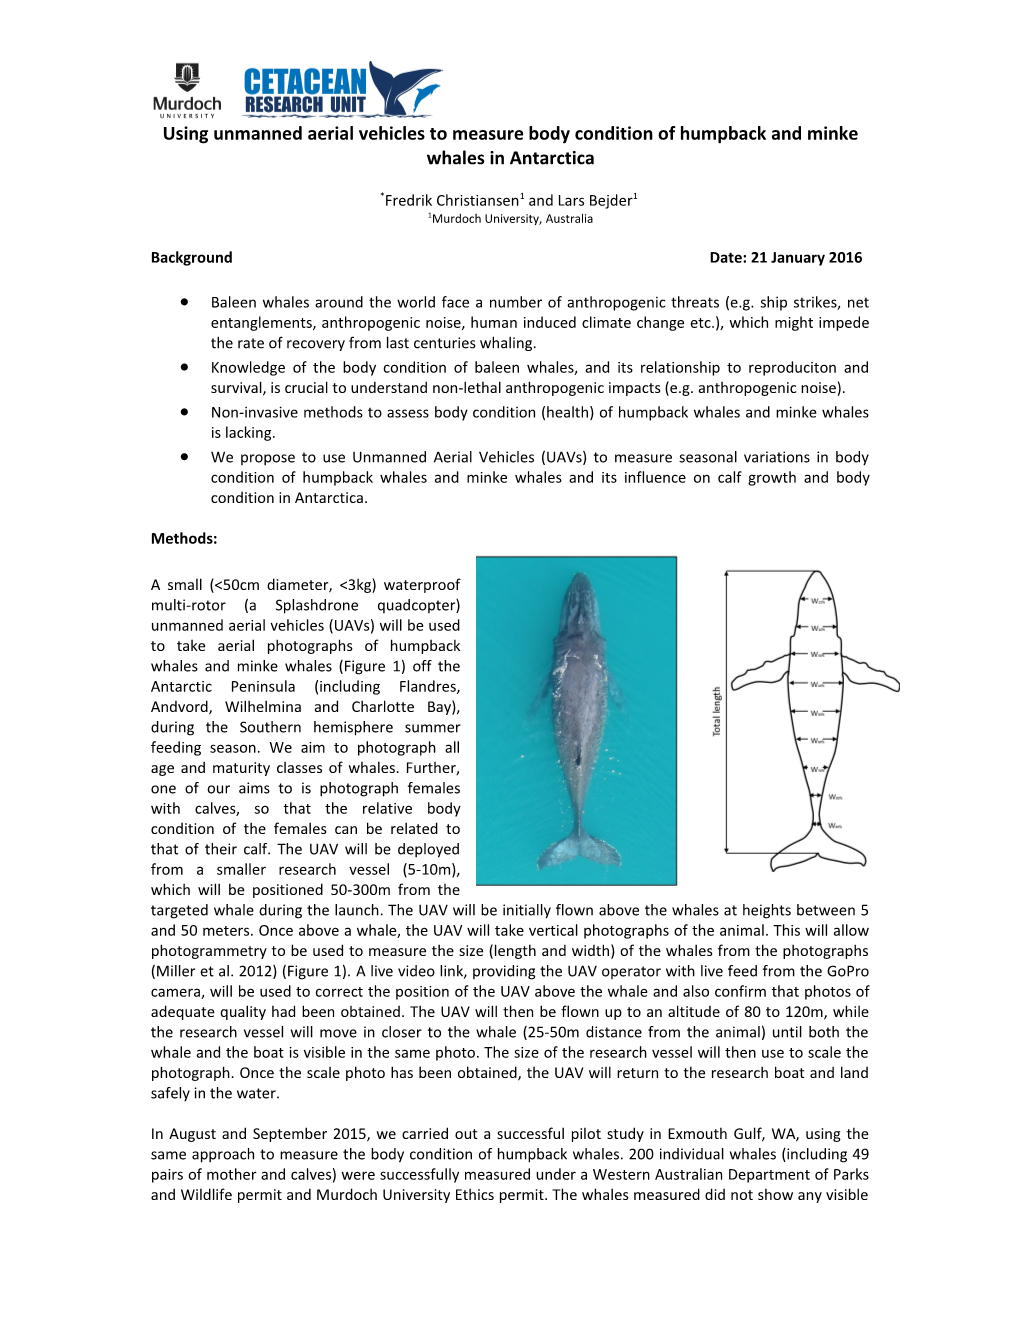 Using Unmanned Aerial Vehicles to Measure Body Condition of Humpback and Minke Whales